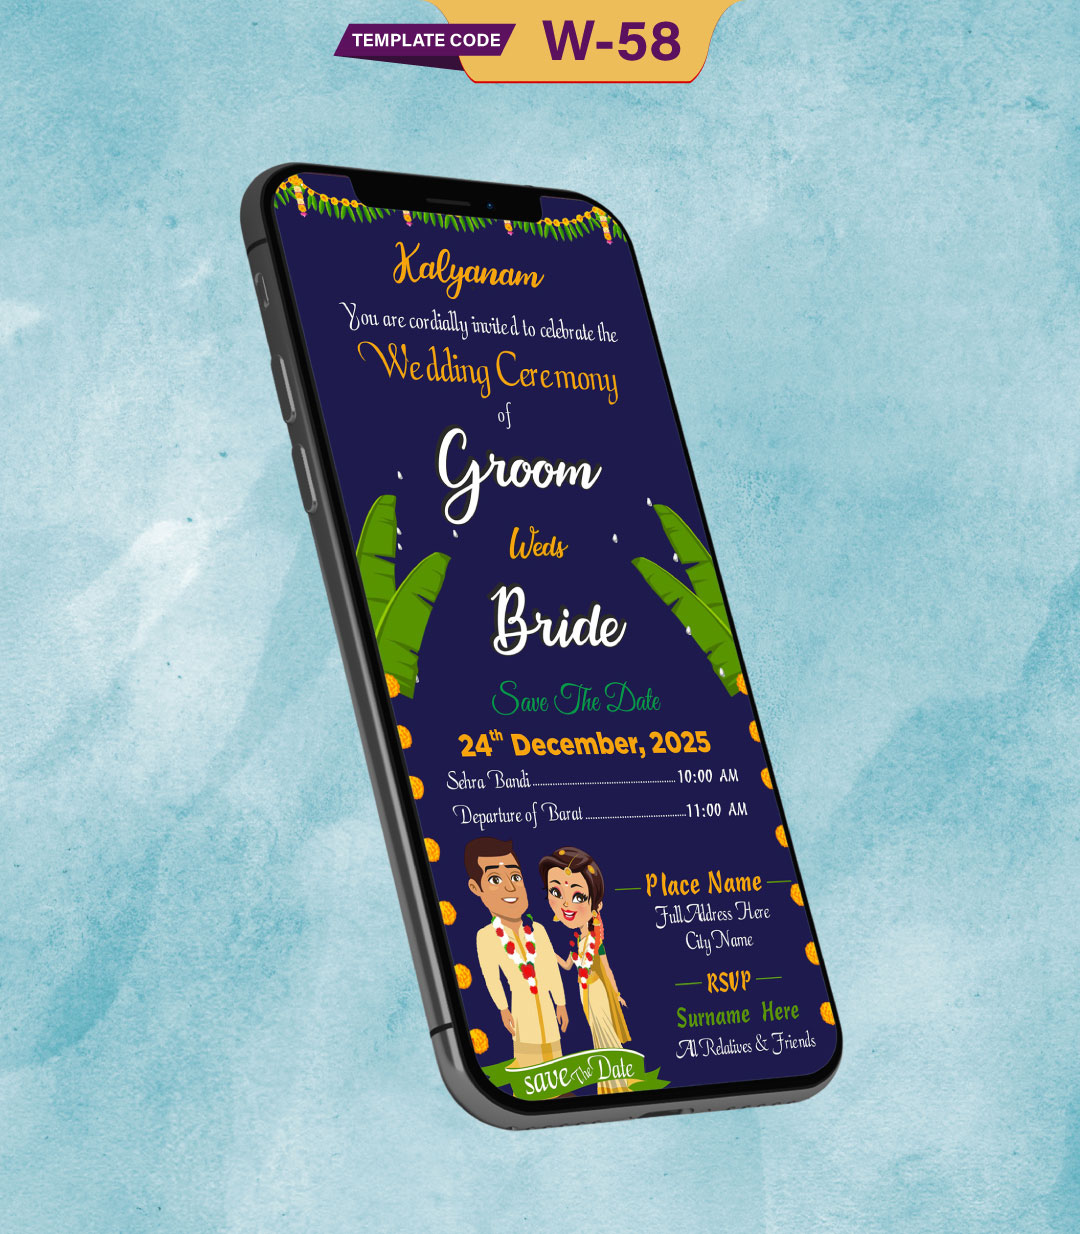 South Indian Wedding Invitation Cards